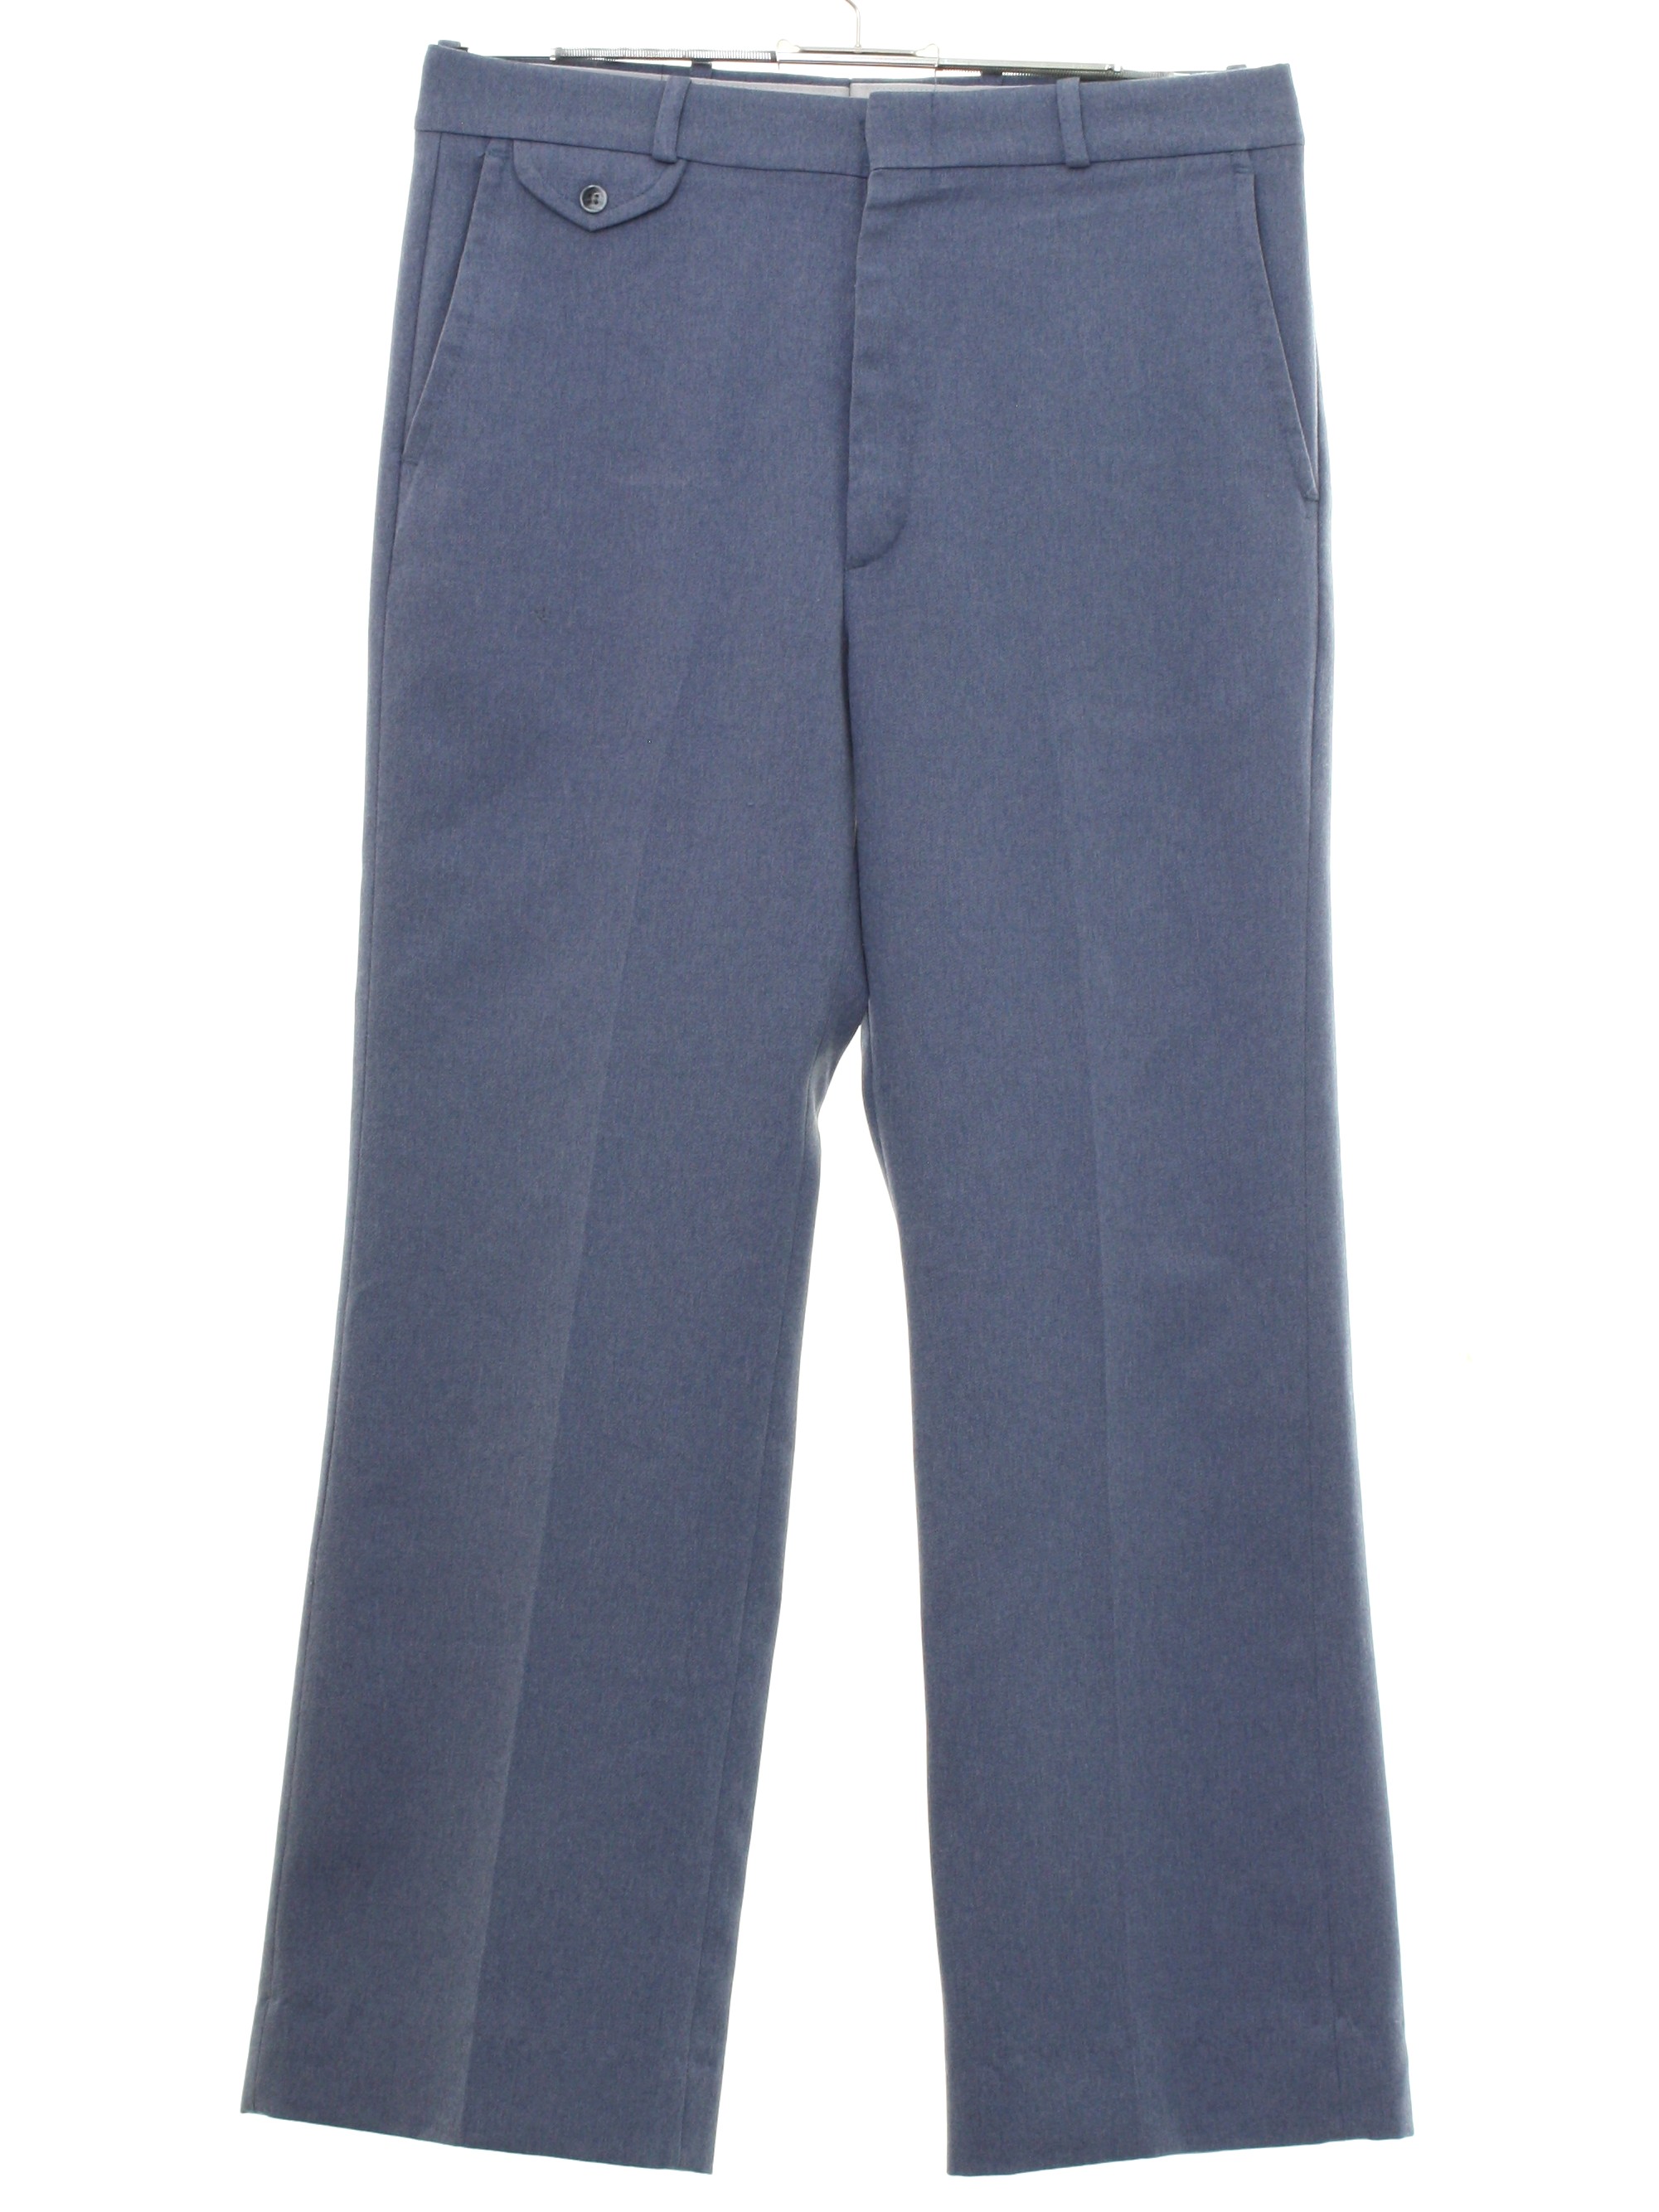 Vintage 1980's Pants: Early 80s -Farah- Mens powder blue solid colored ...